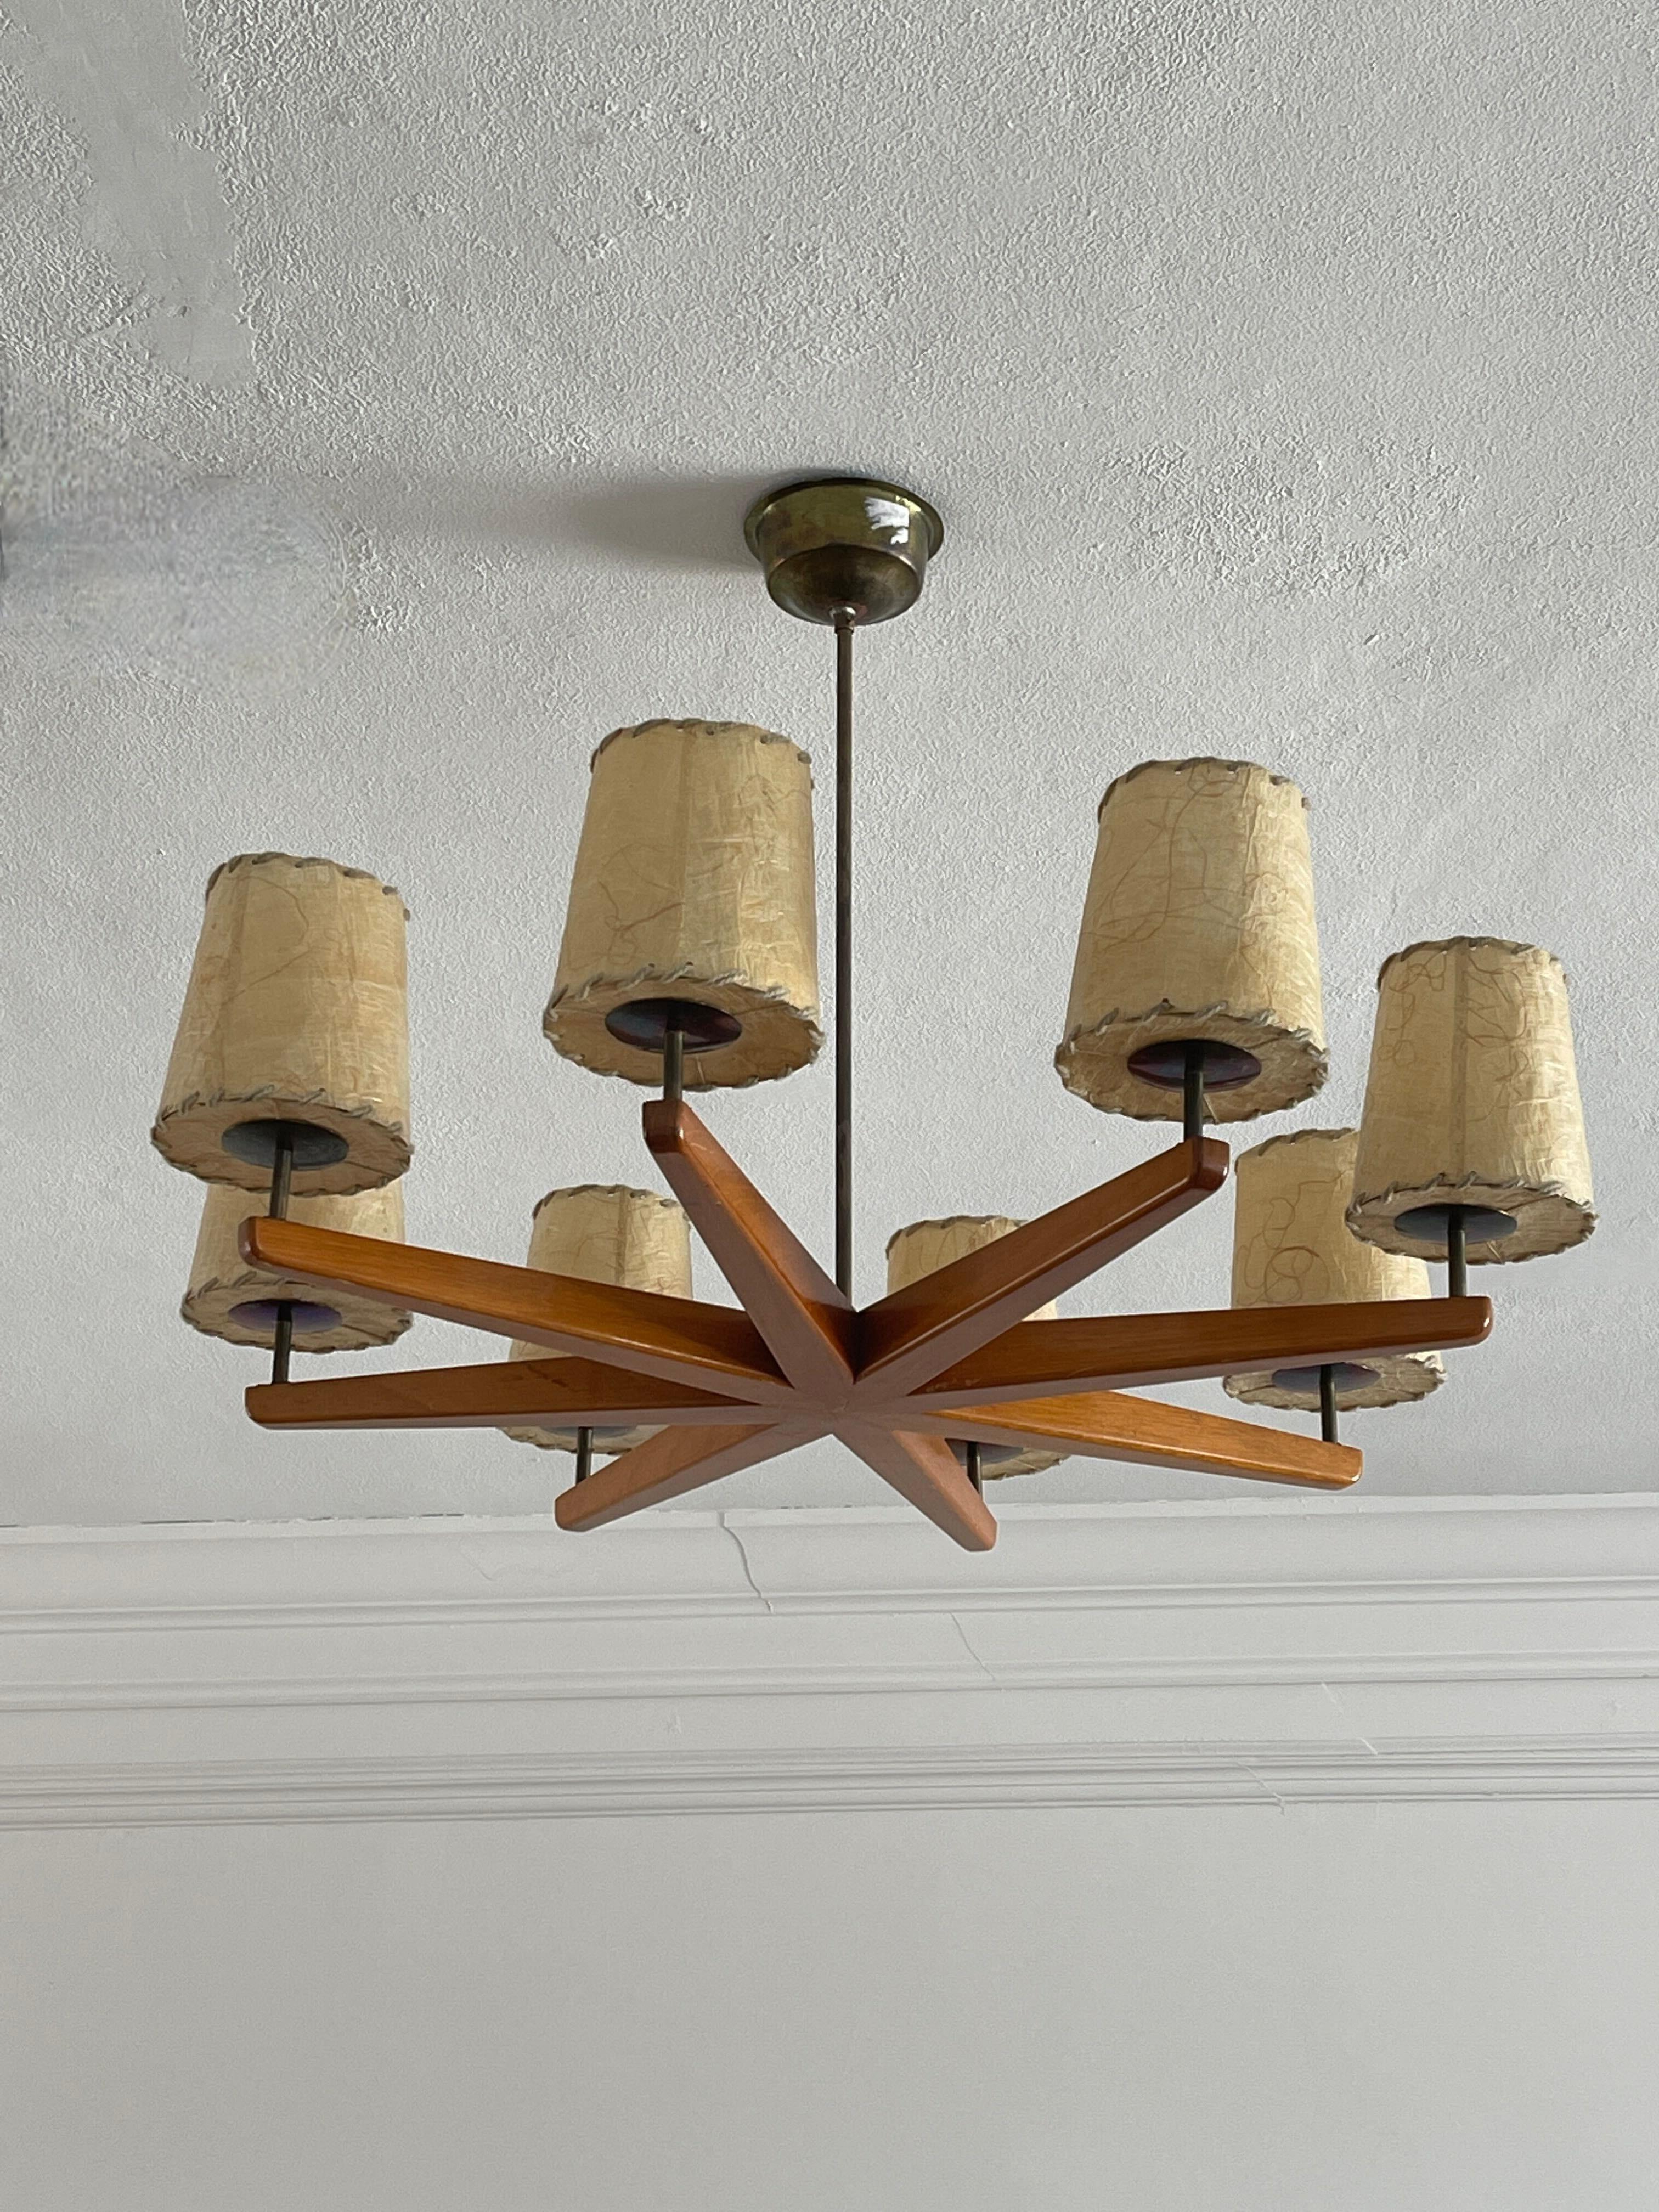 An eight-armed chandelier in wood, brass, and parchment paper. Designed and produced in Sweden, 1930s.